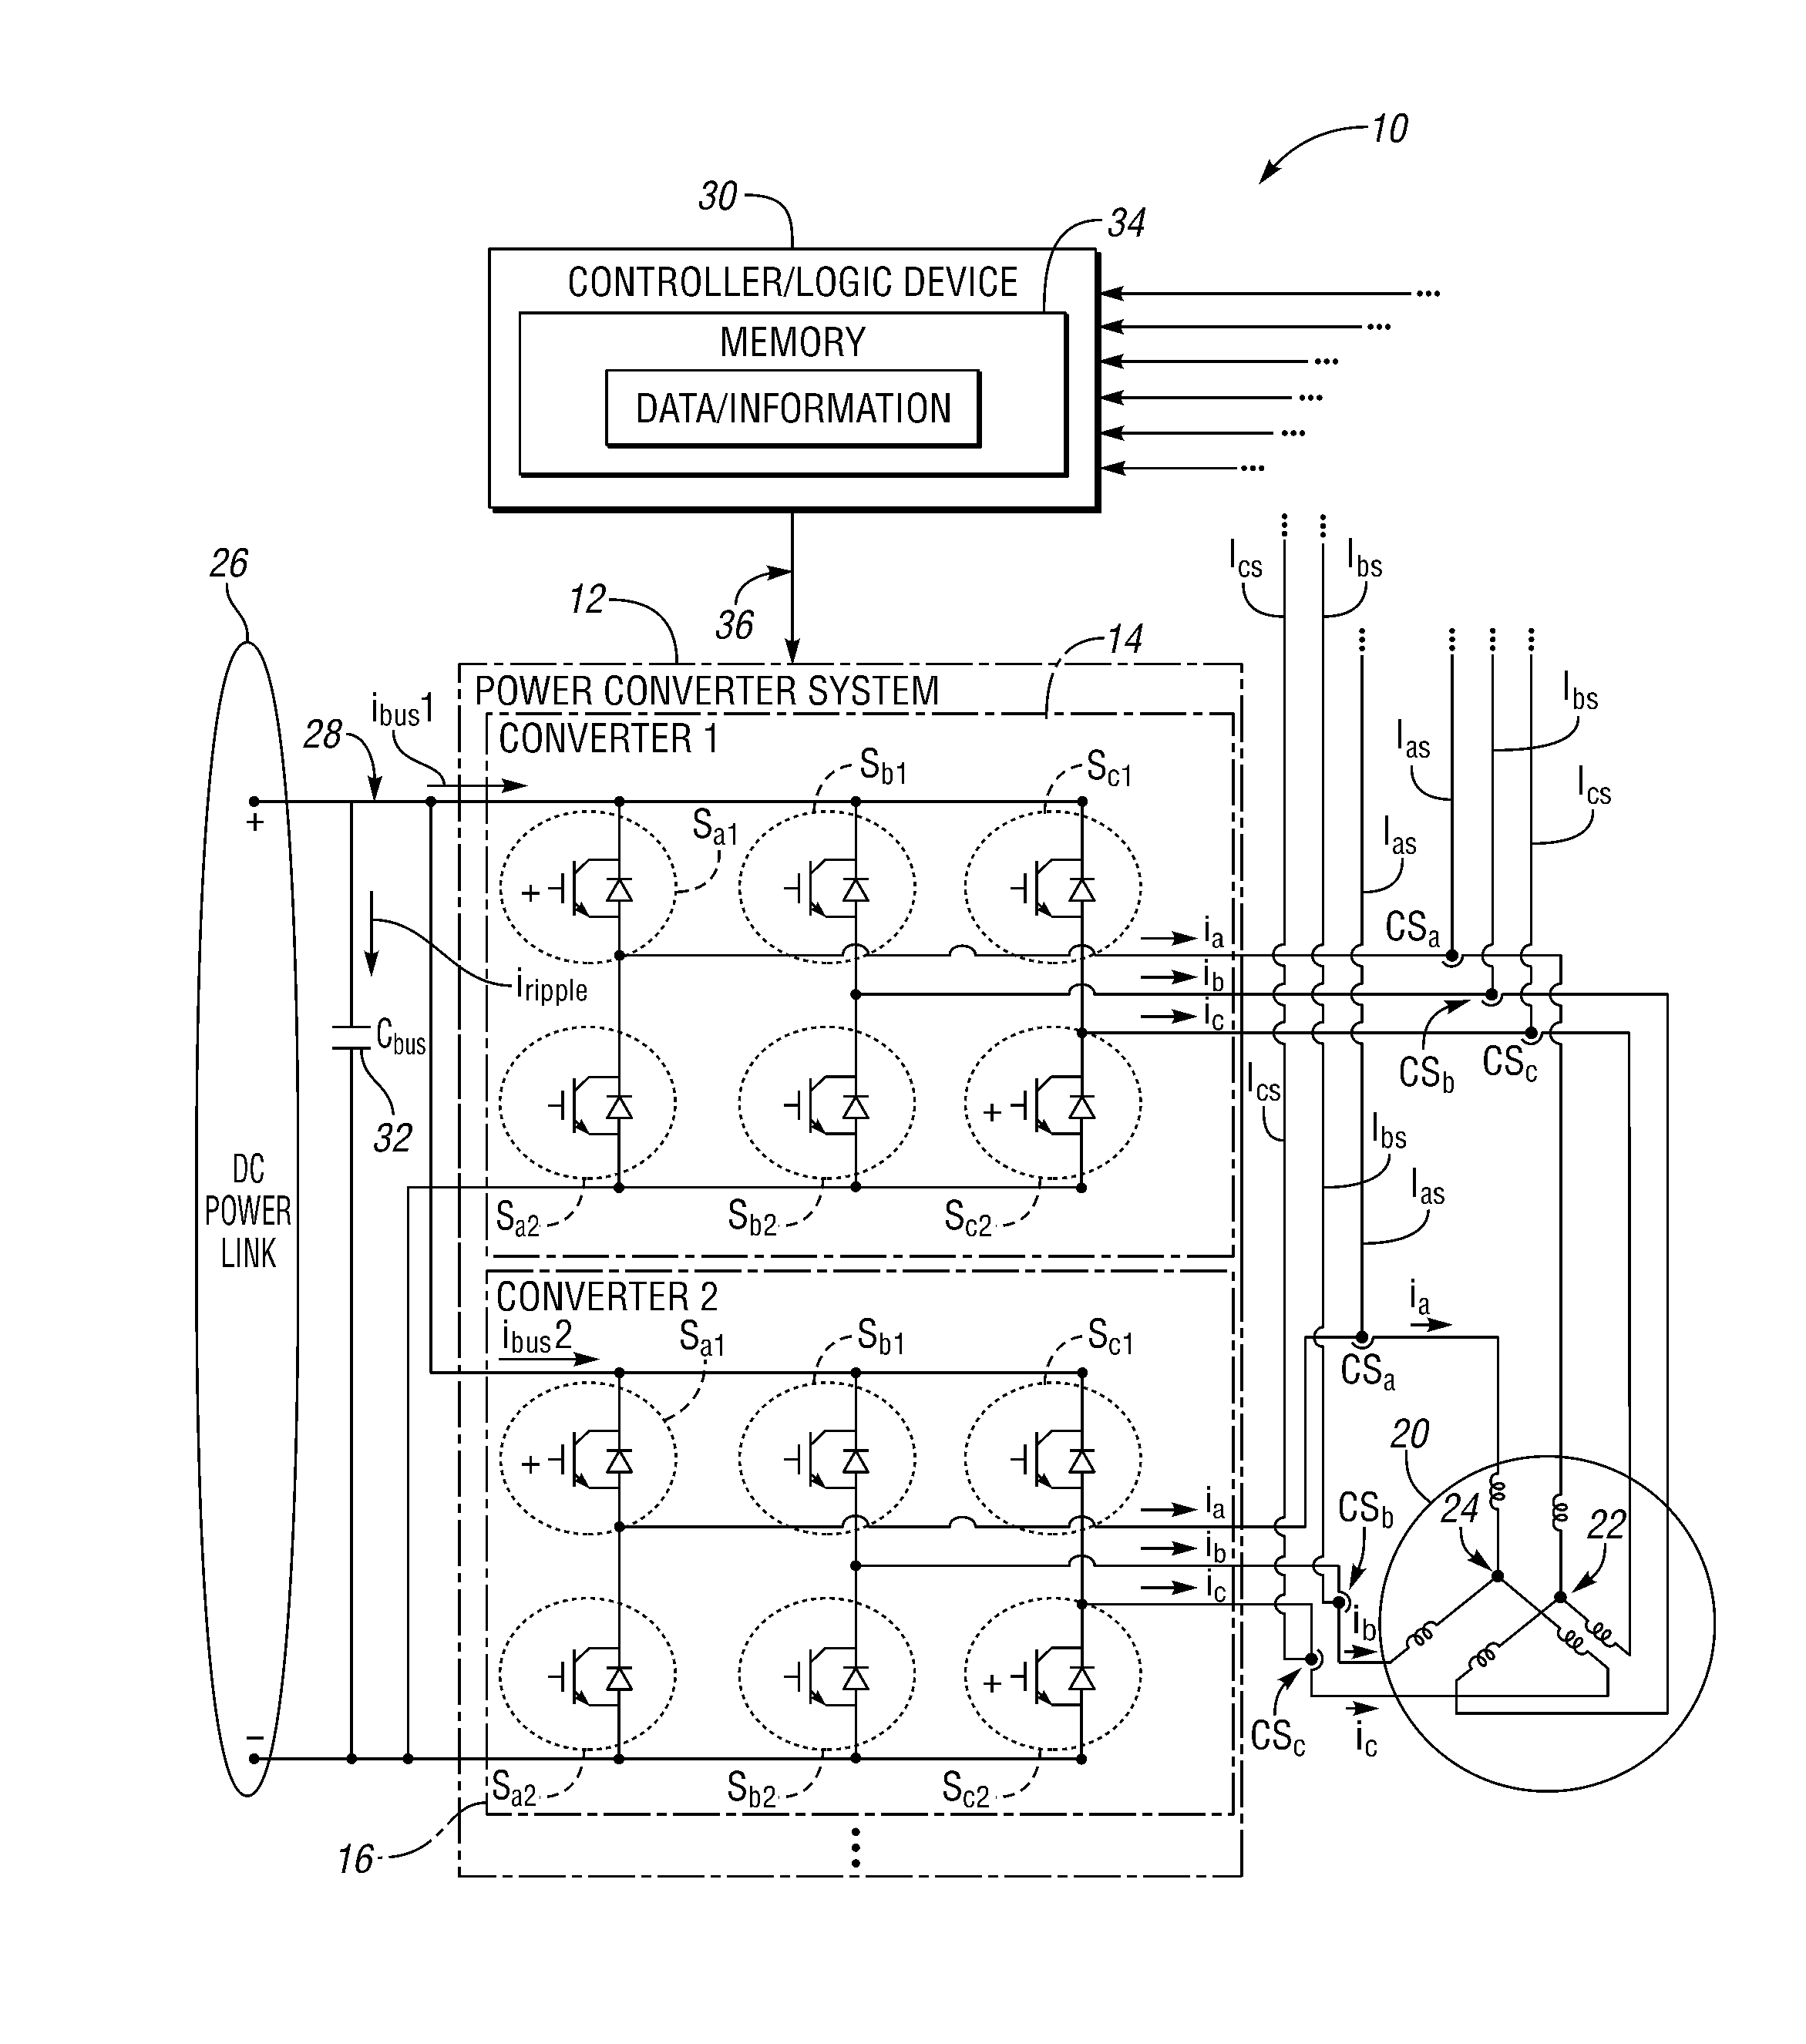 Method And System For Controlling A Power Converter System Connected To A DC-Bus Capacitor